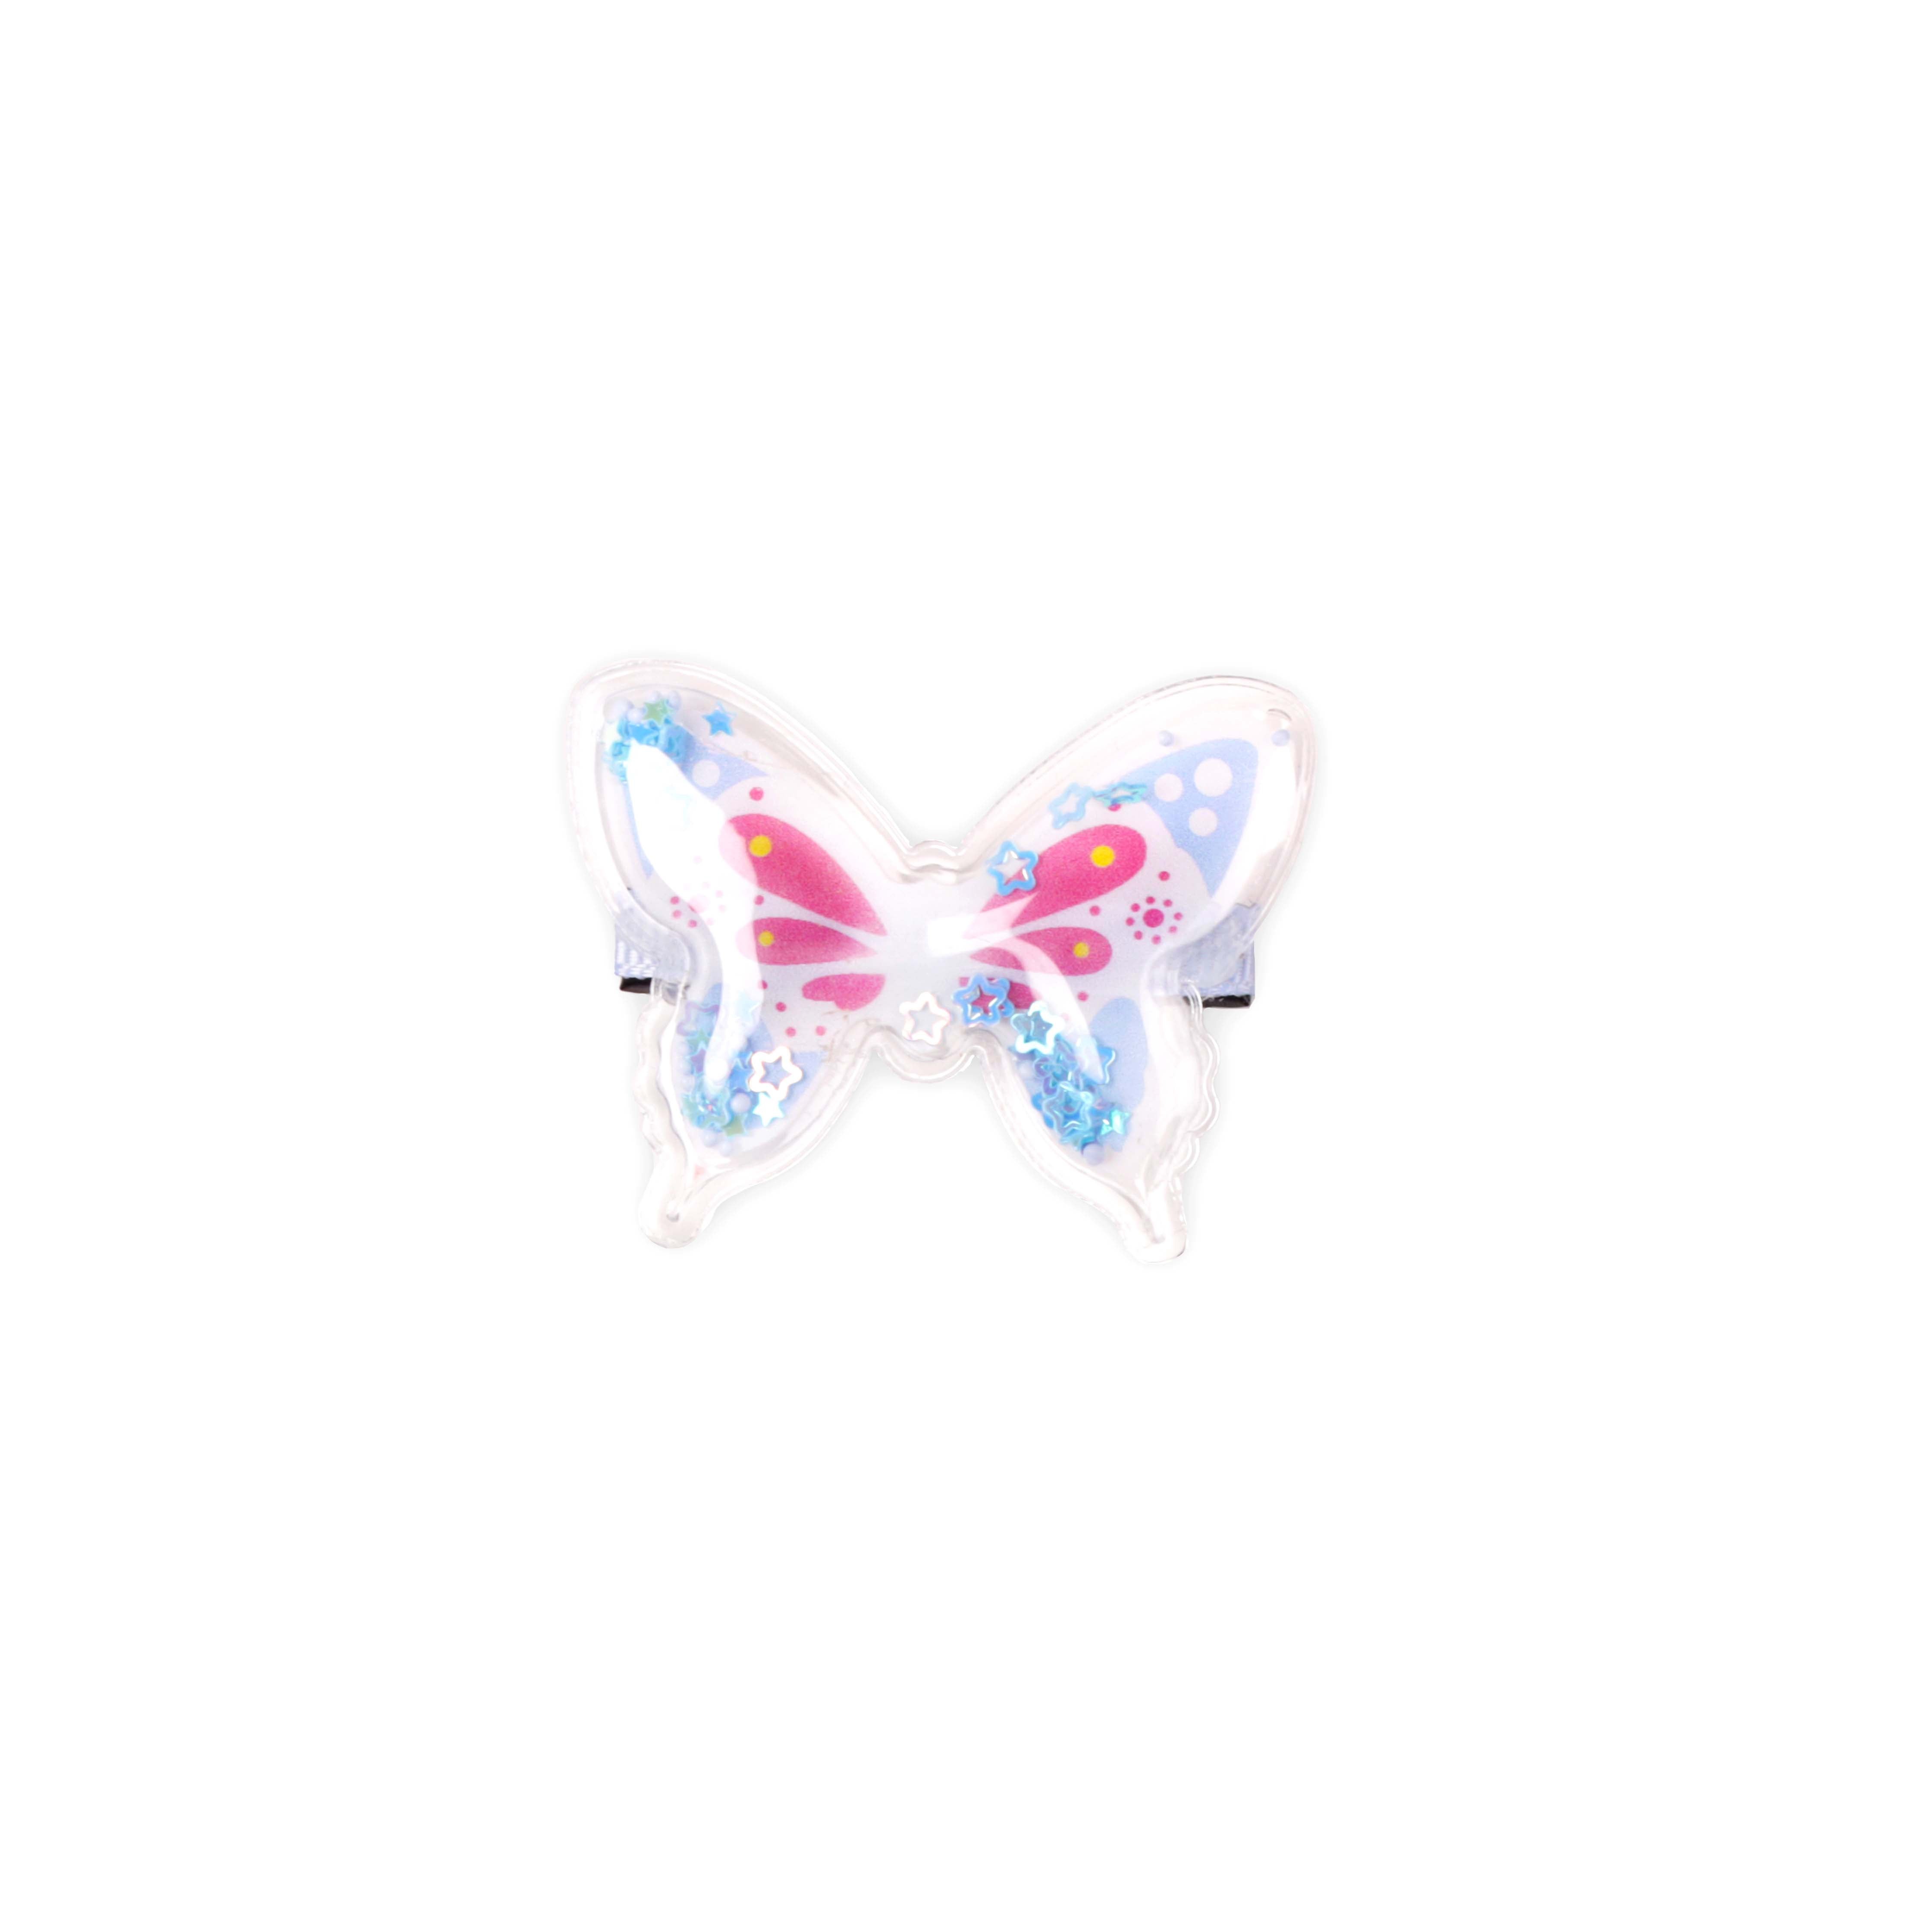 Kicks & Crawl - Baby Butterfly Hairclips -Pack of 3